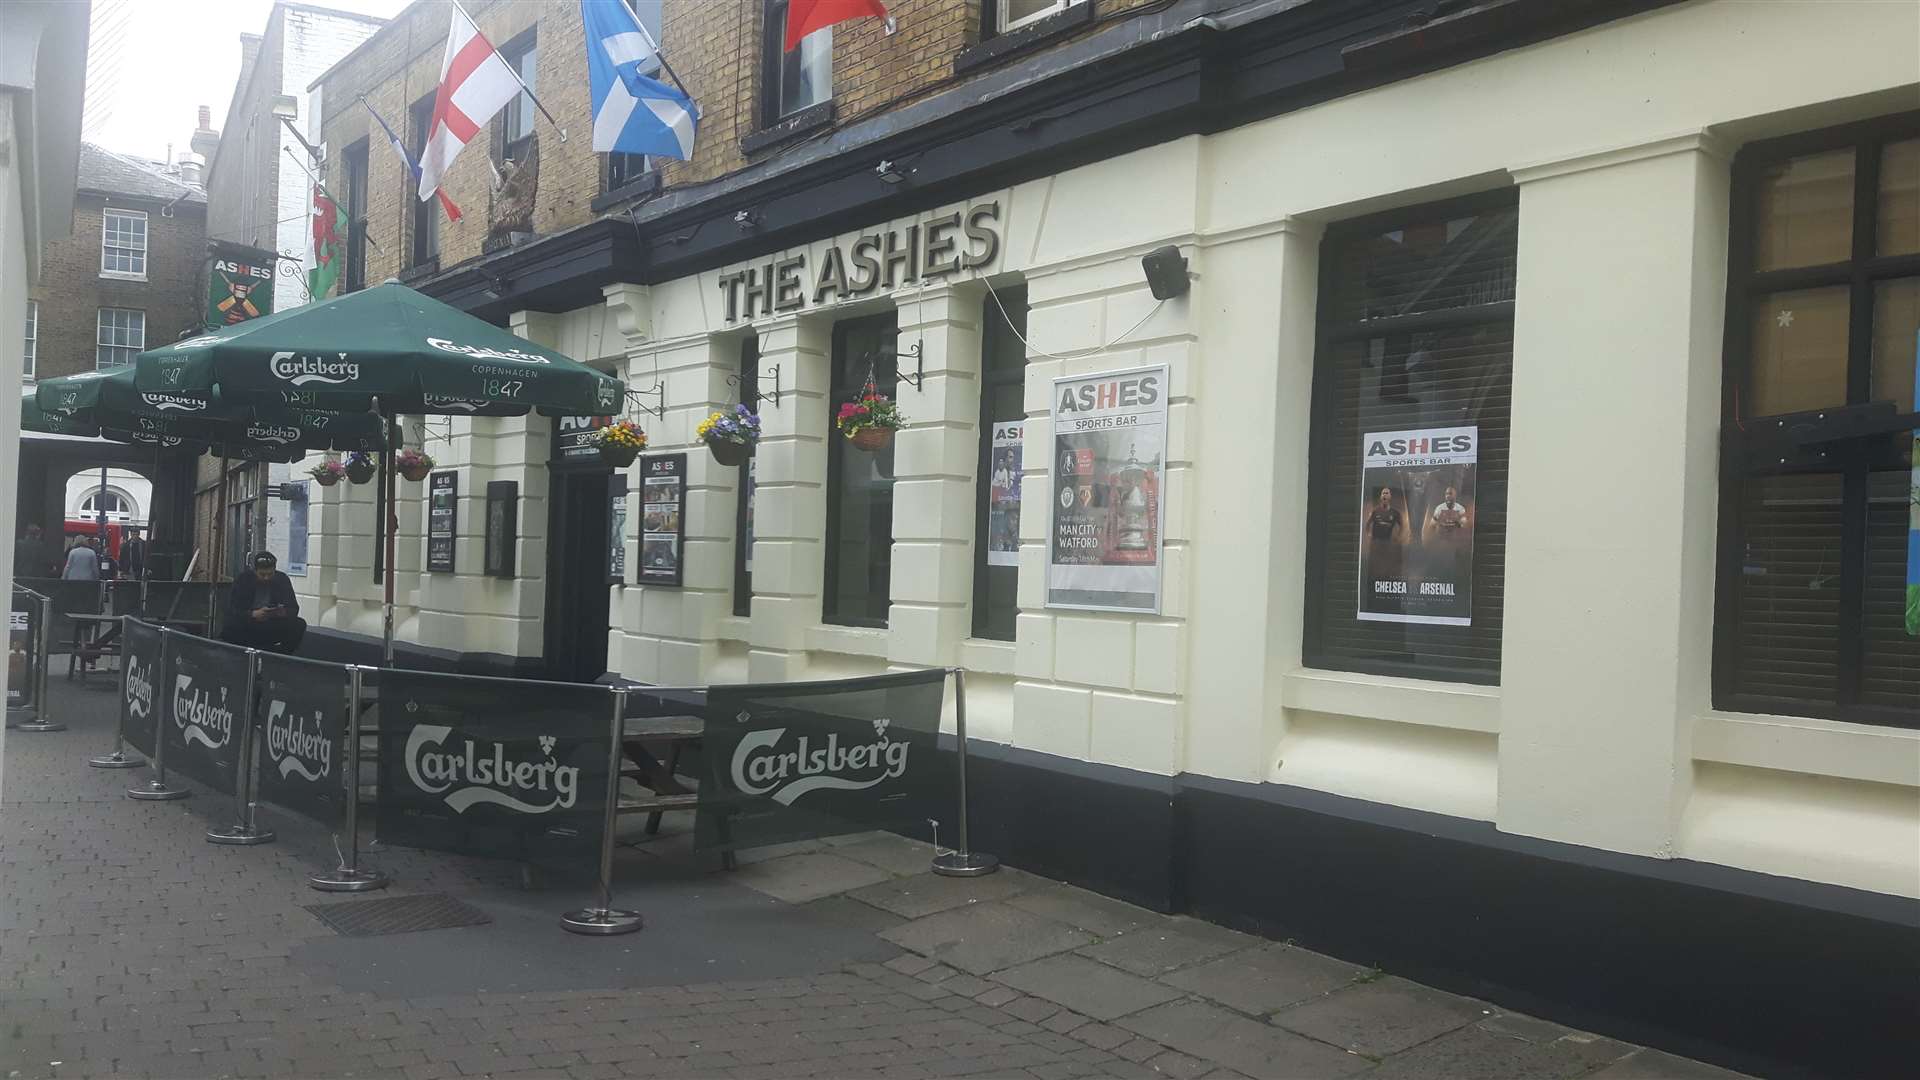 The Ashes pub and sports bar in Market Buildings Maidstone (10742526)